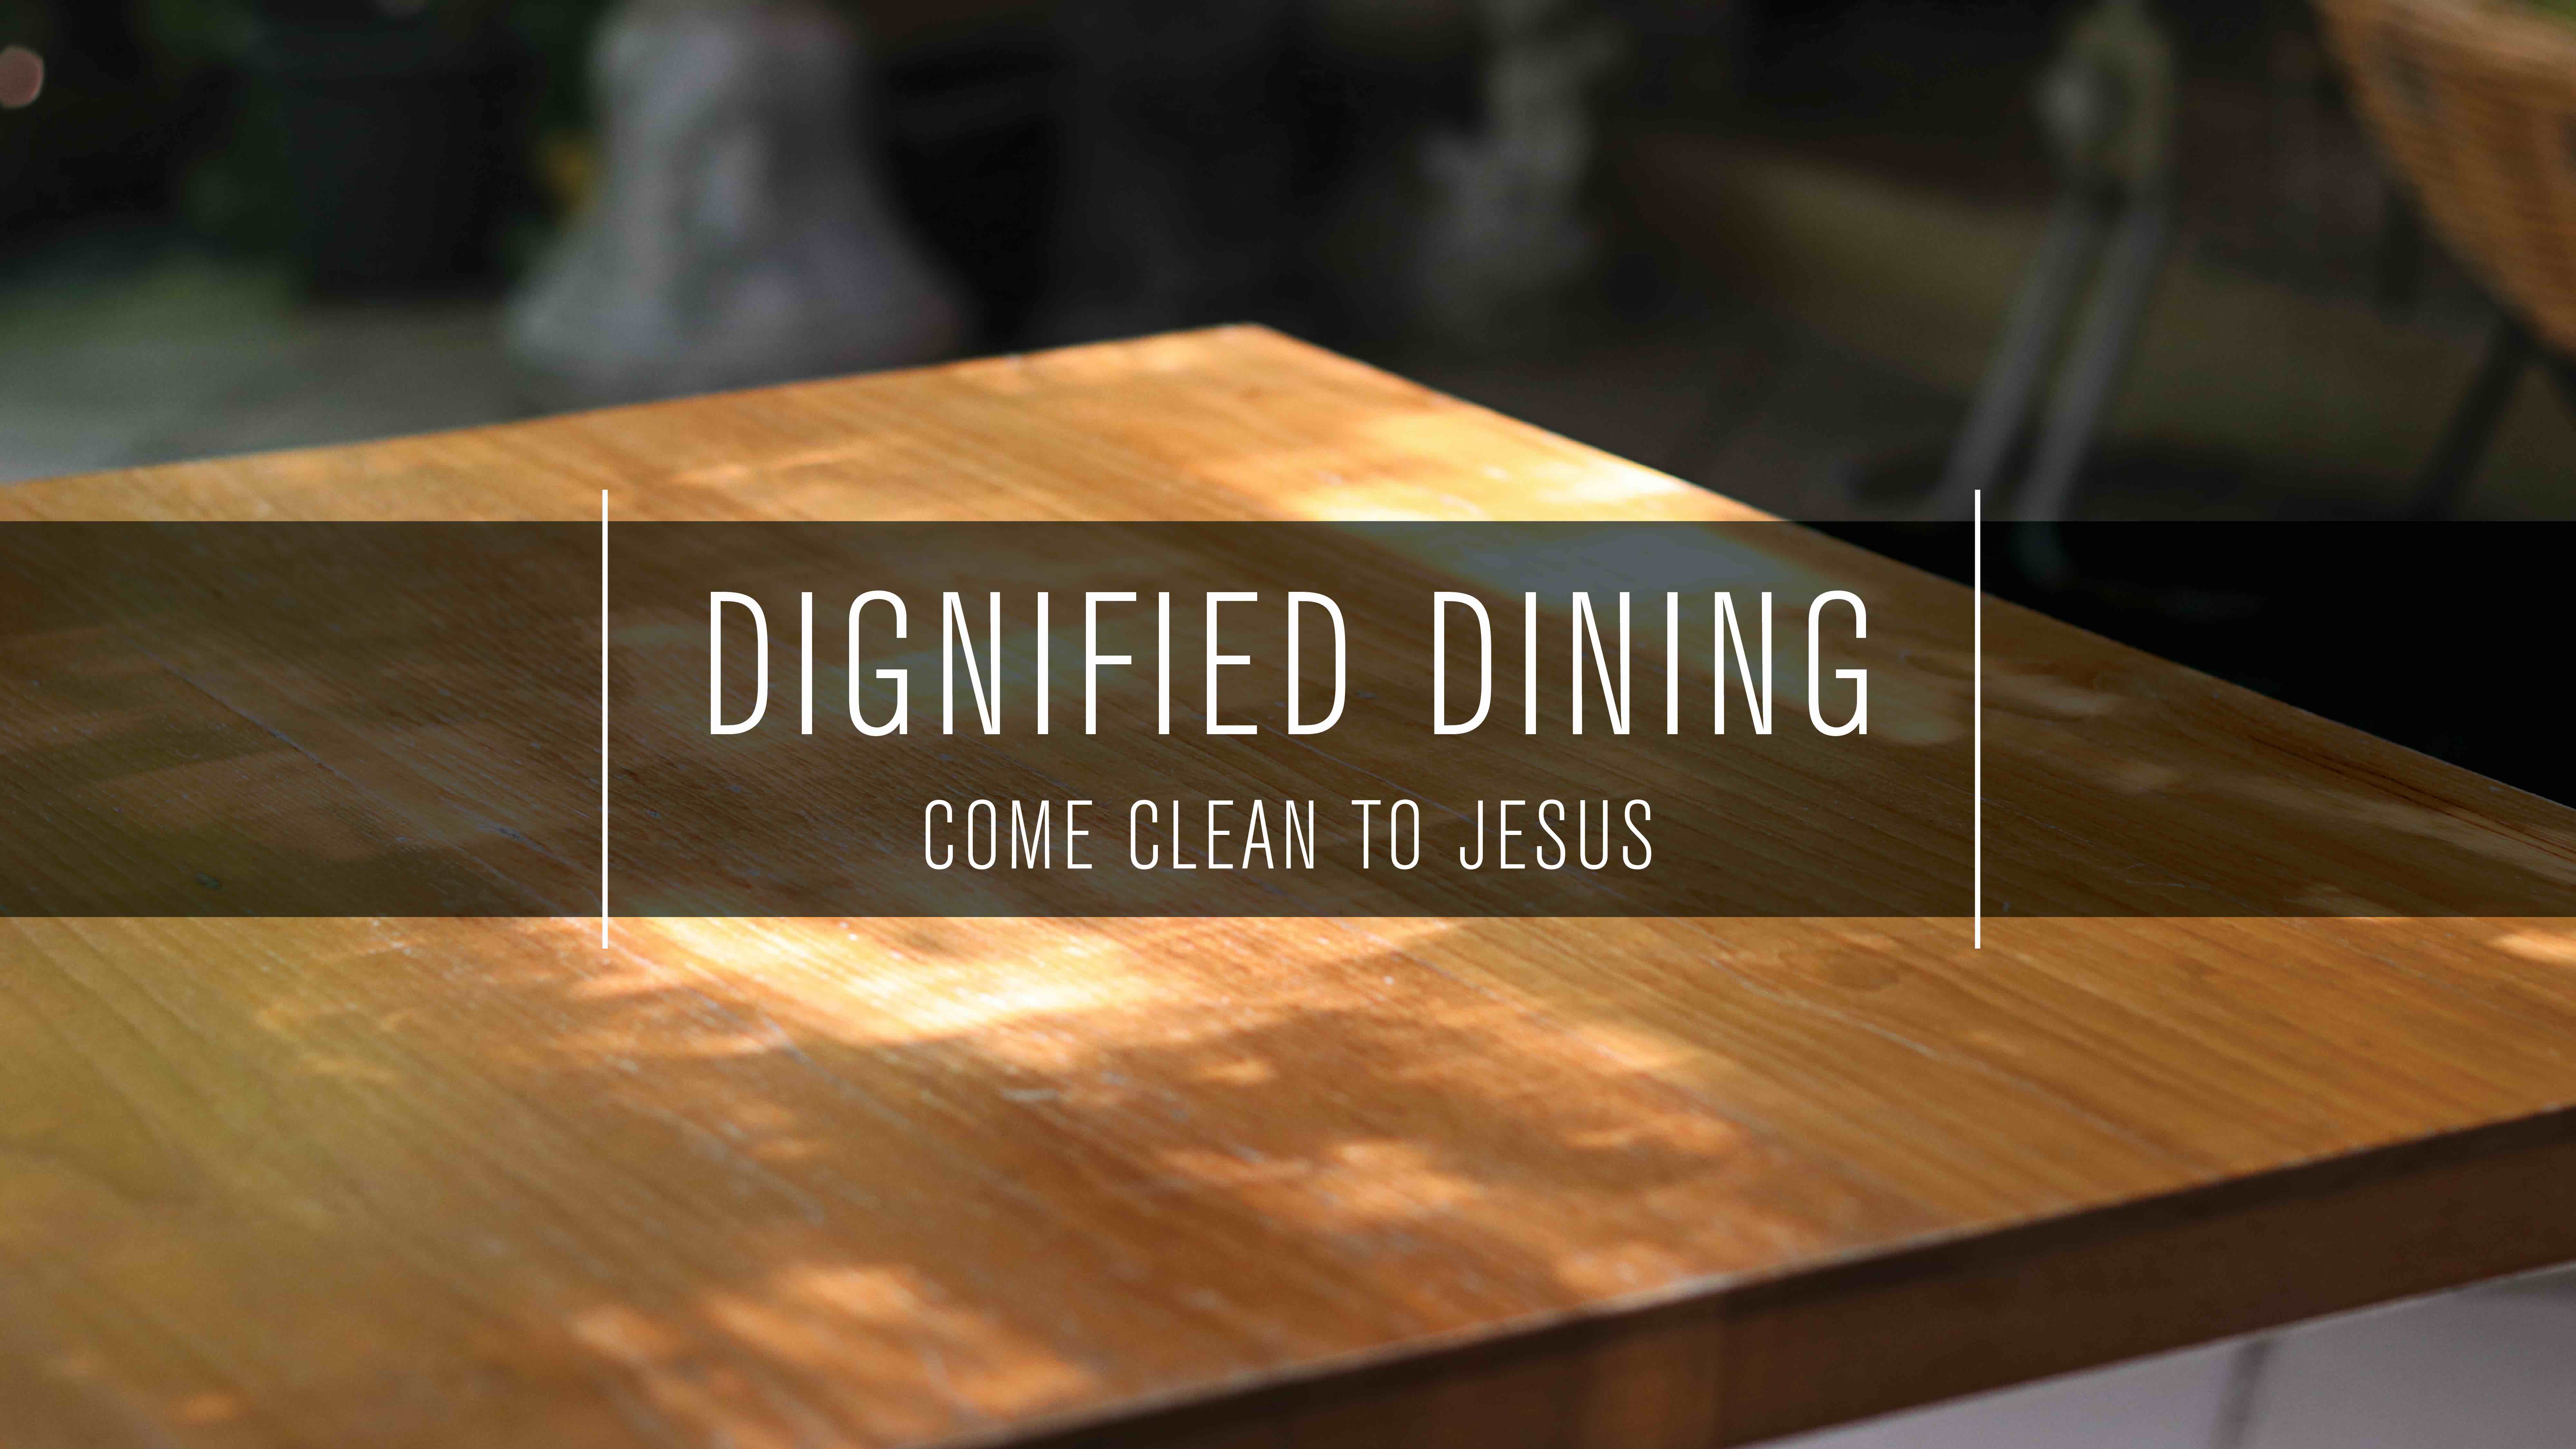 Dignified Dining: Come Clean to Jesus